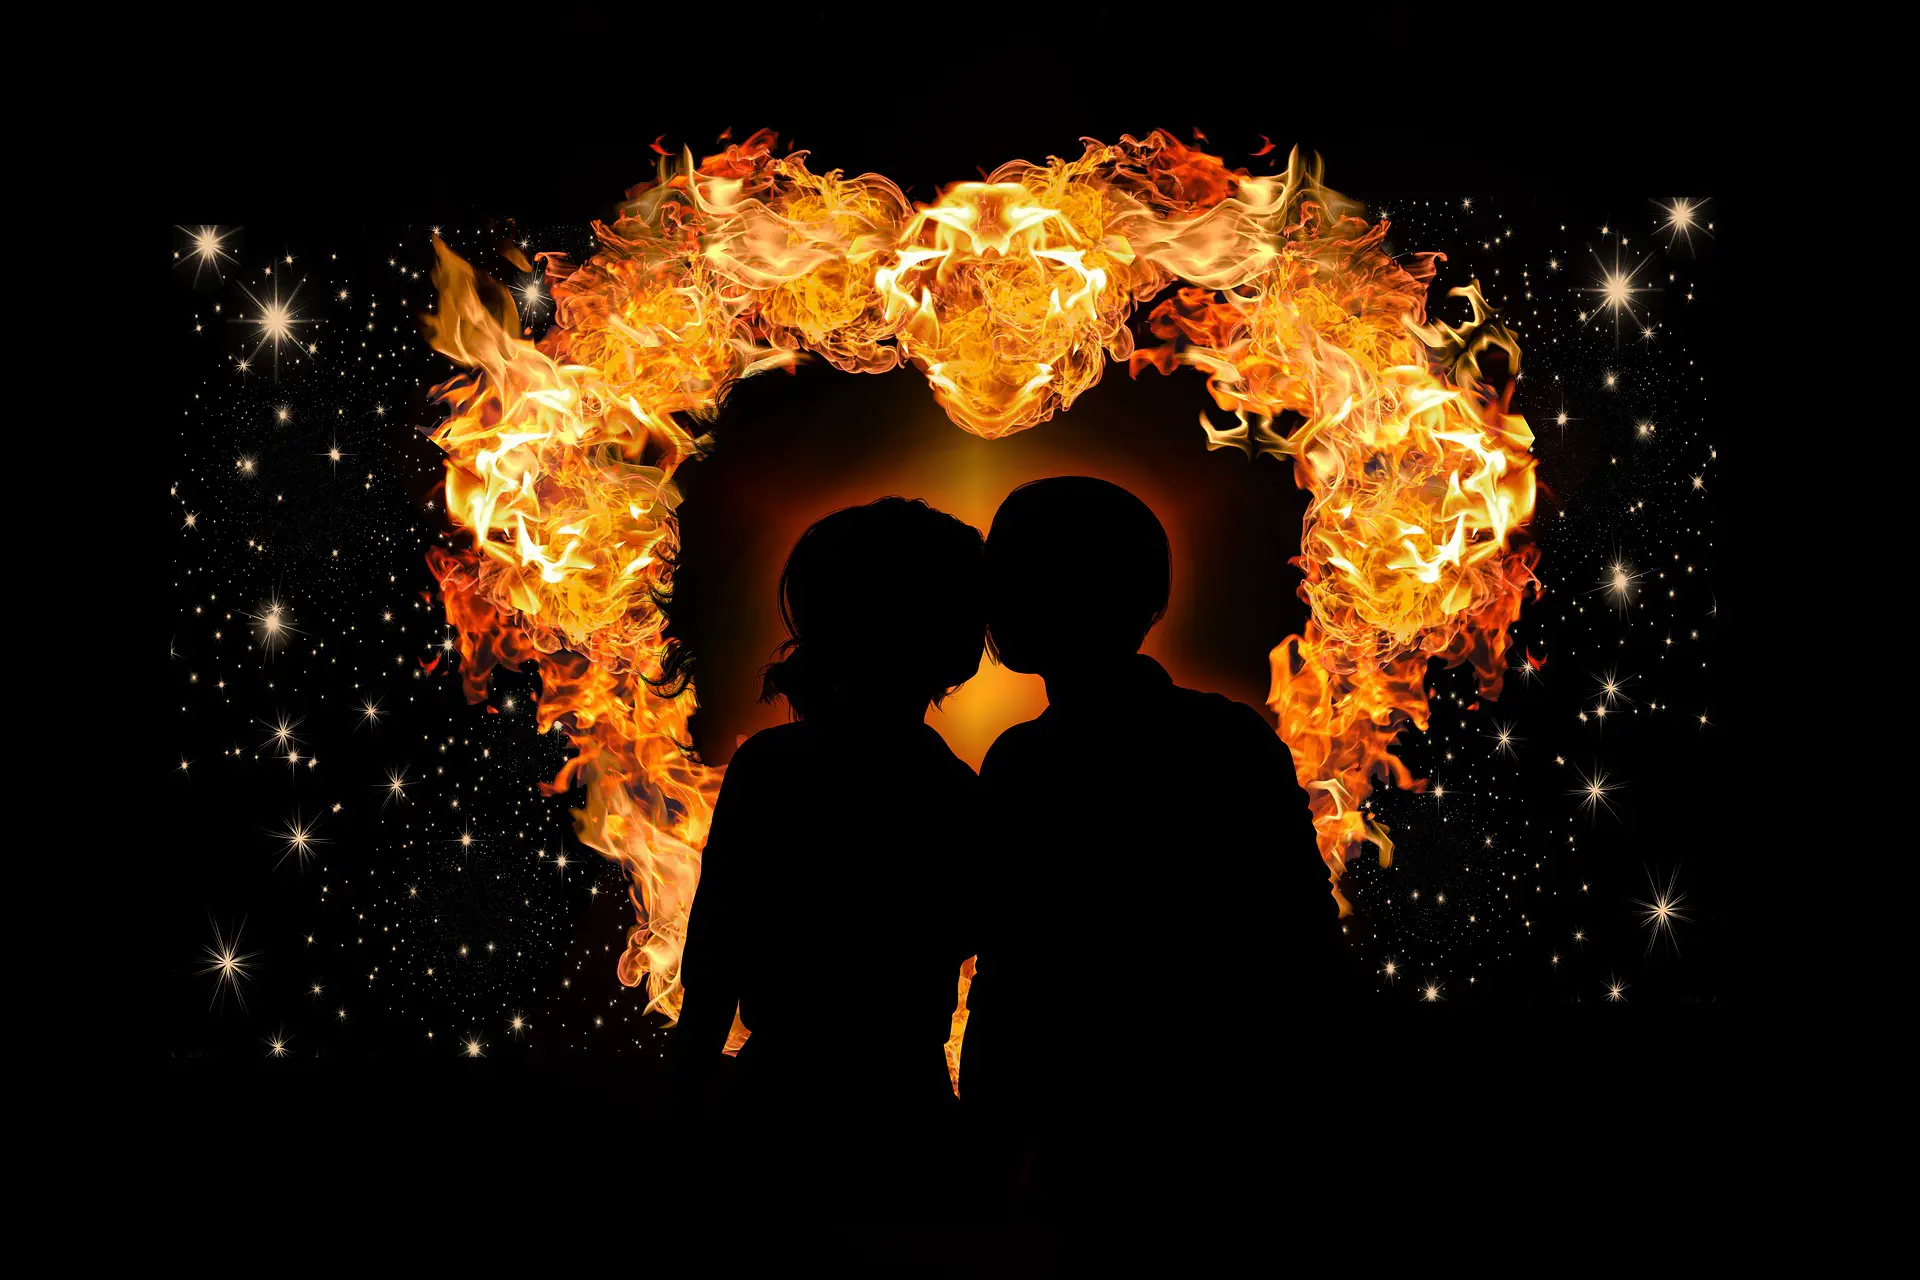 50 Spiritual Twin Flame Quotes For Him & Her